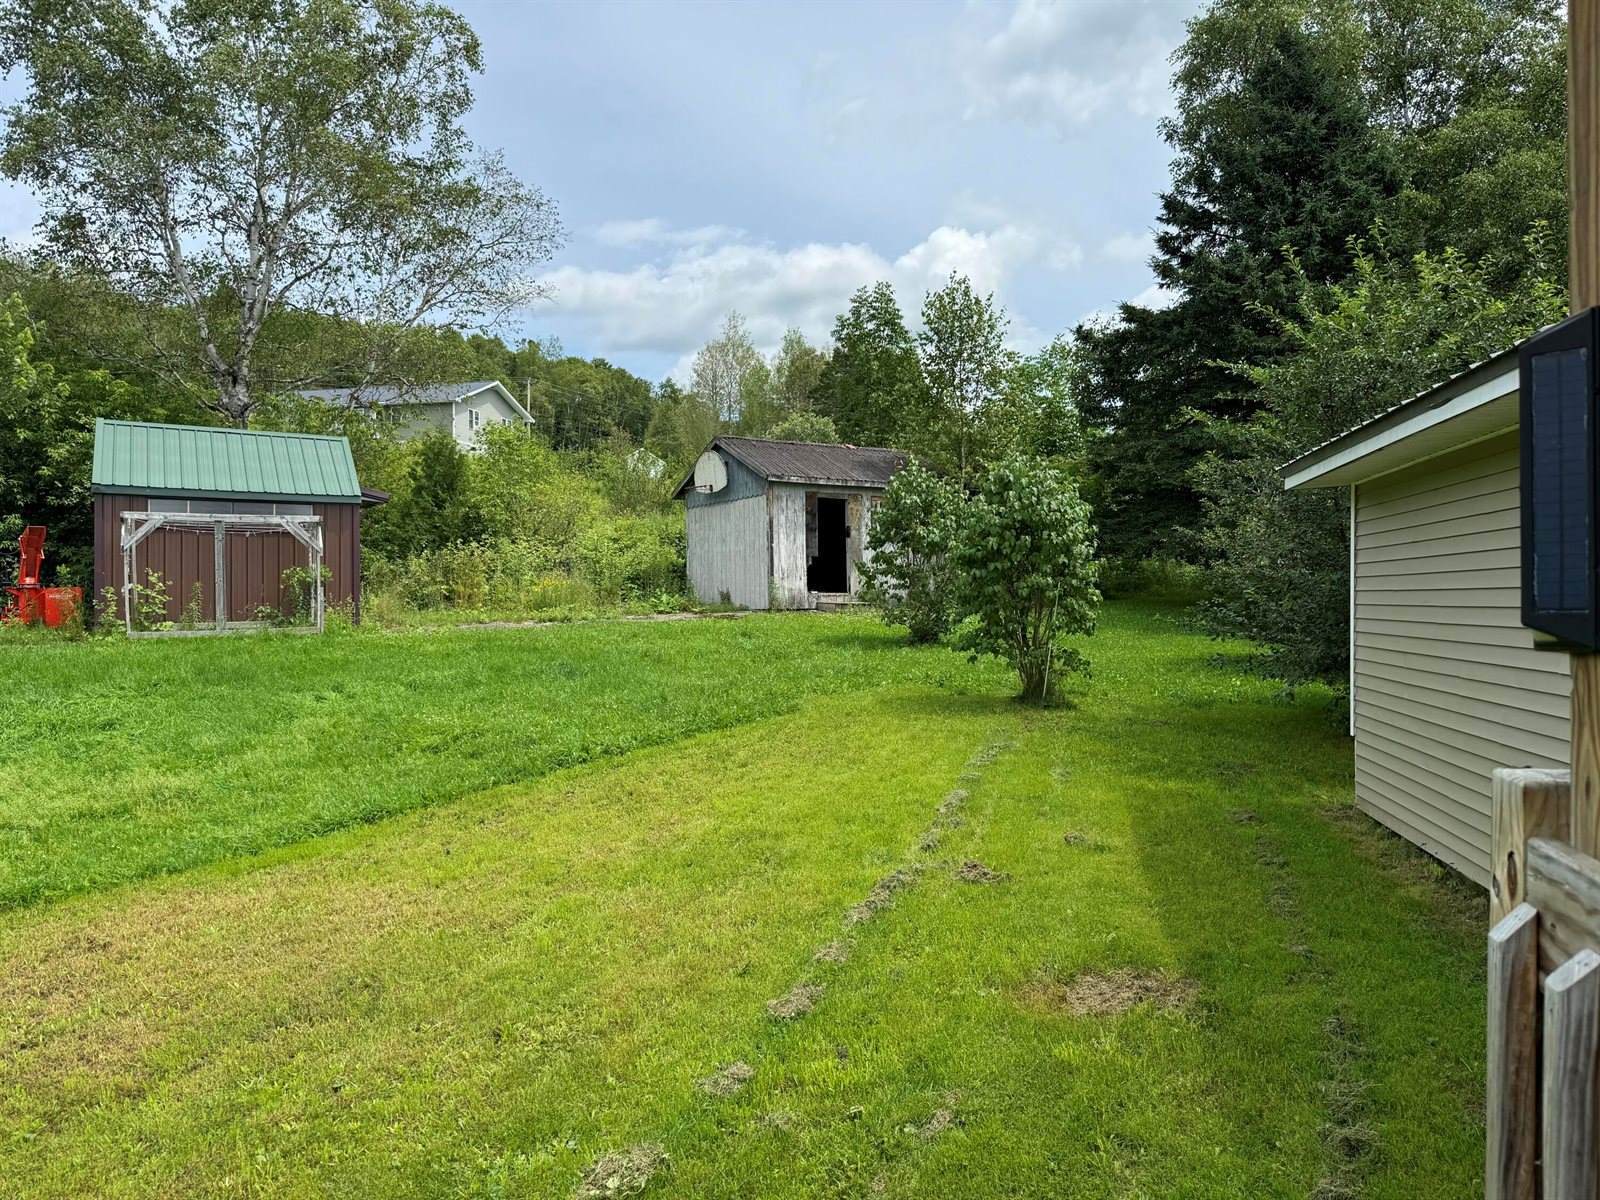 43 Colby Siding Road, Woodland, ME 04736